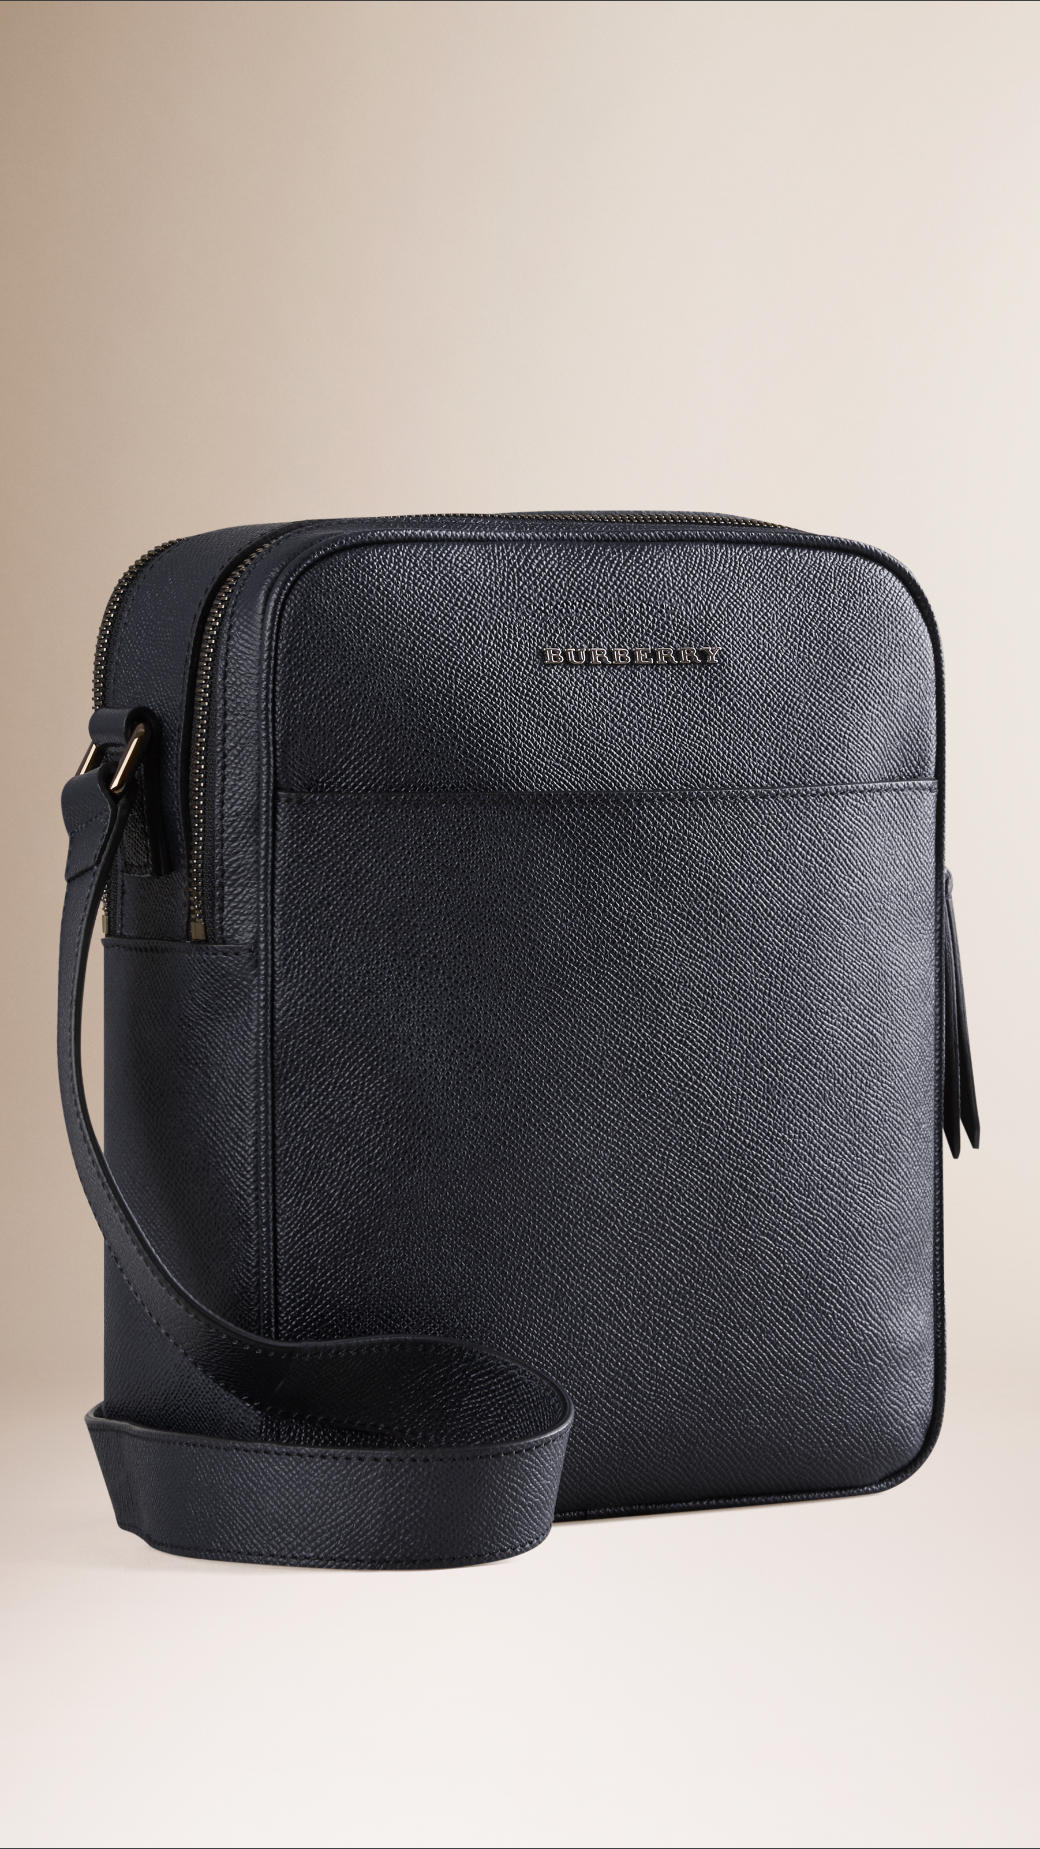 Burberry London Leather Crossbody Bag in Blue for Men - Lyst